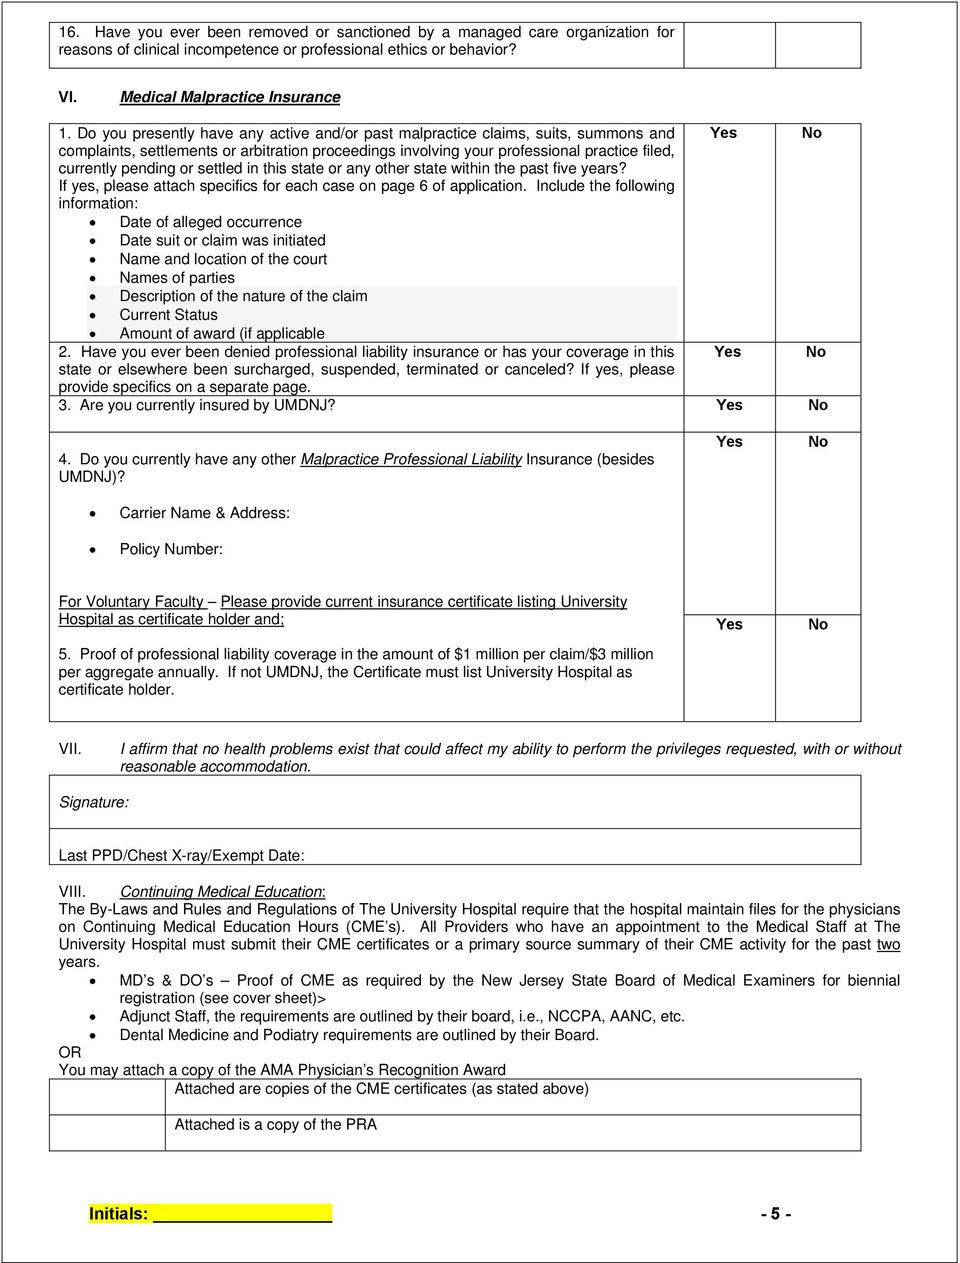 pending or settled in this state or any other state within the past five years? If yes, please attach specifics for each case on page 6 of application.